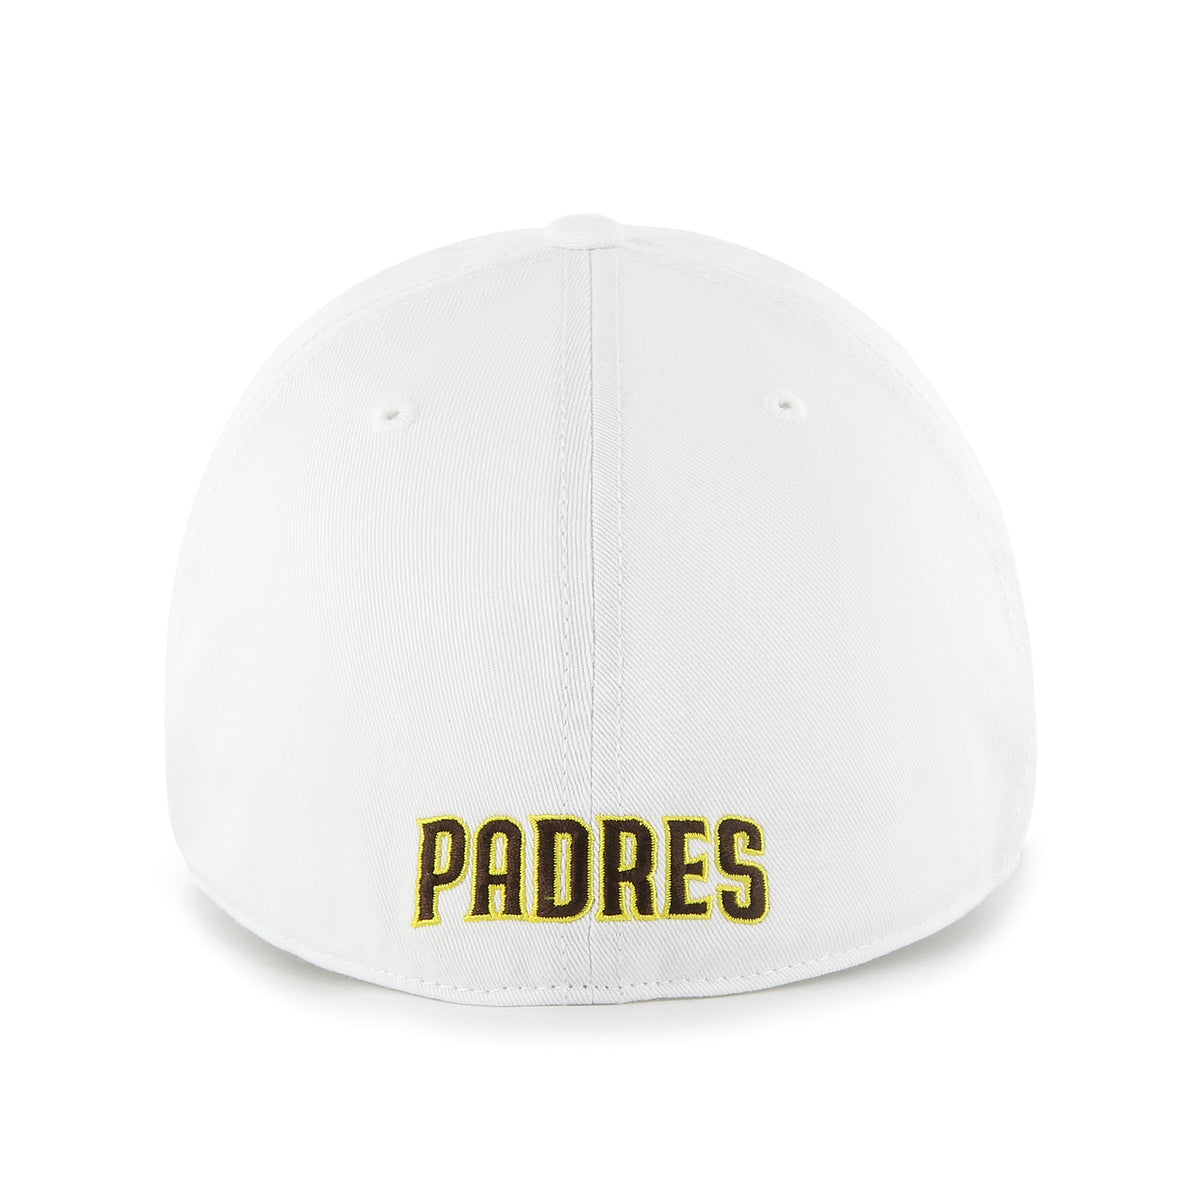 SAN DIEGO PADRES CLASSIC '47 FRANCHISE